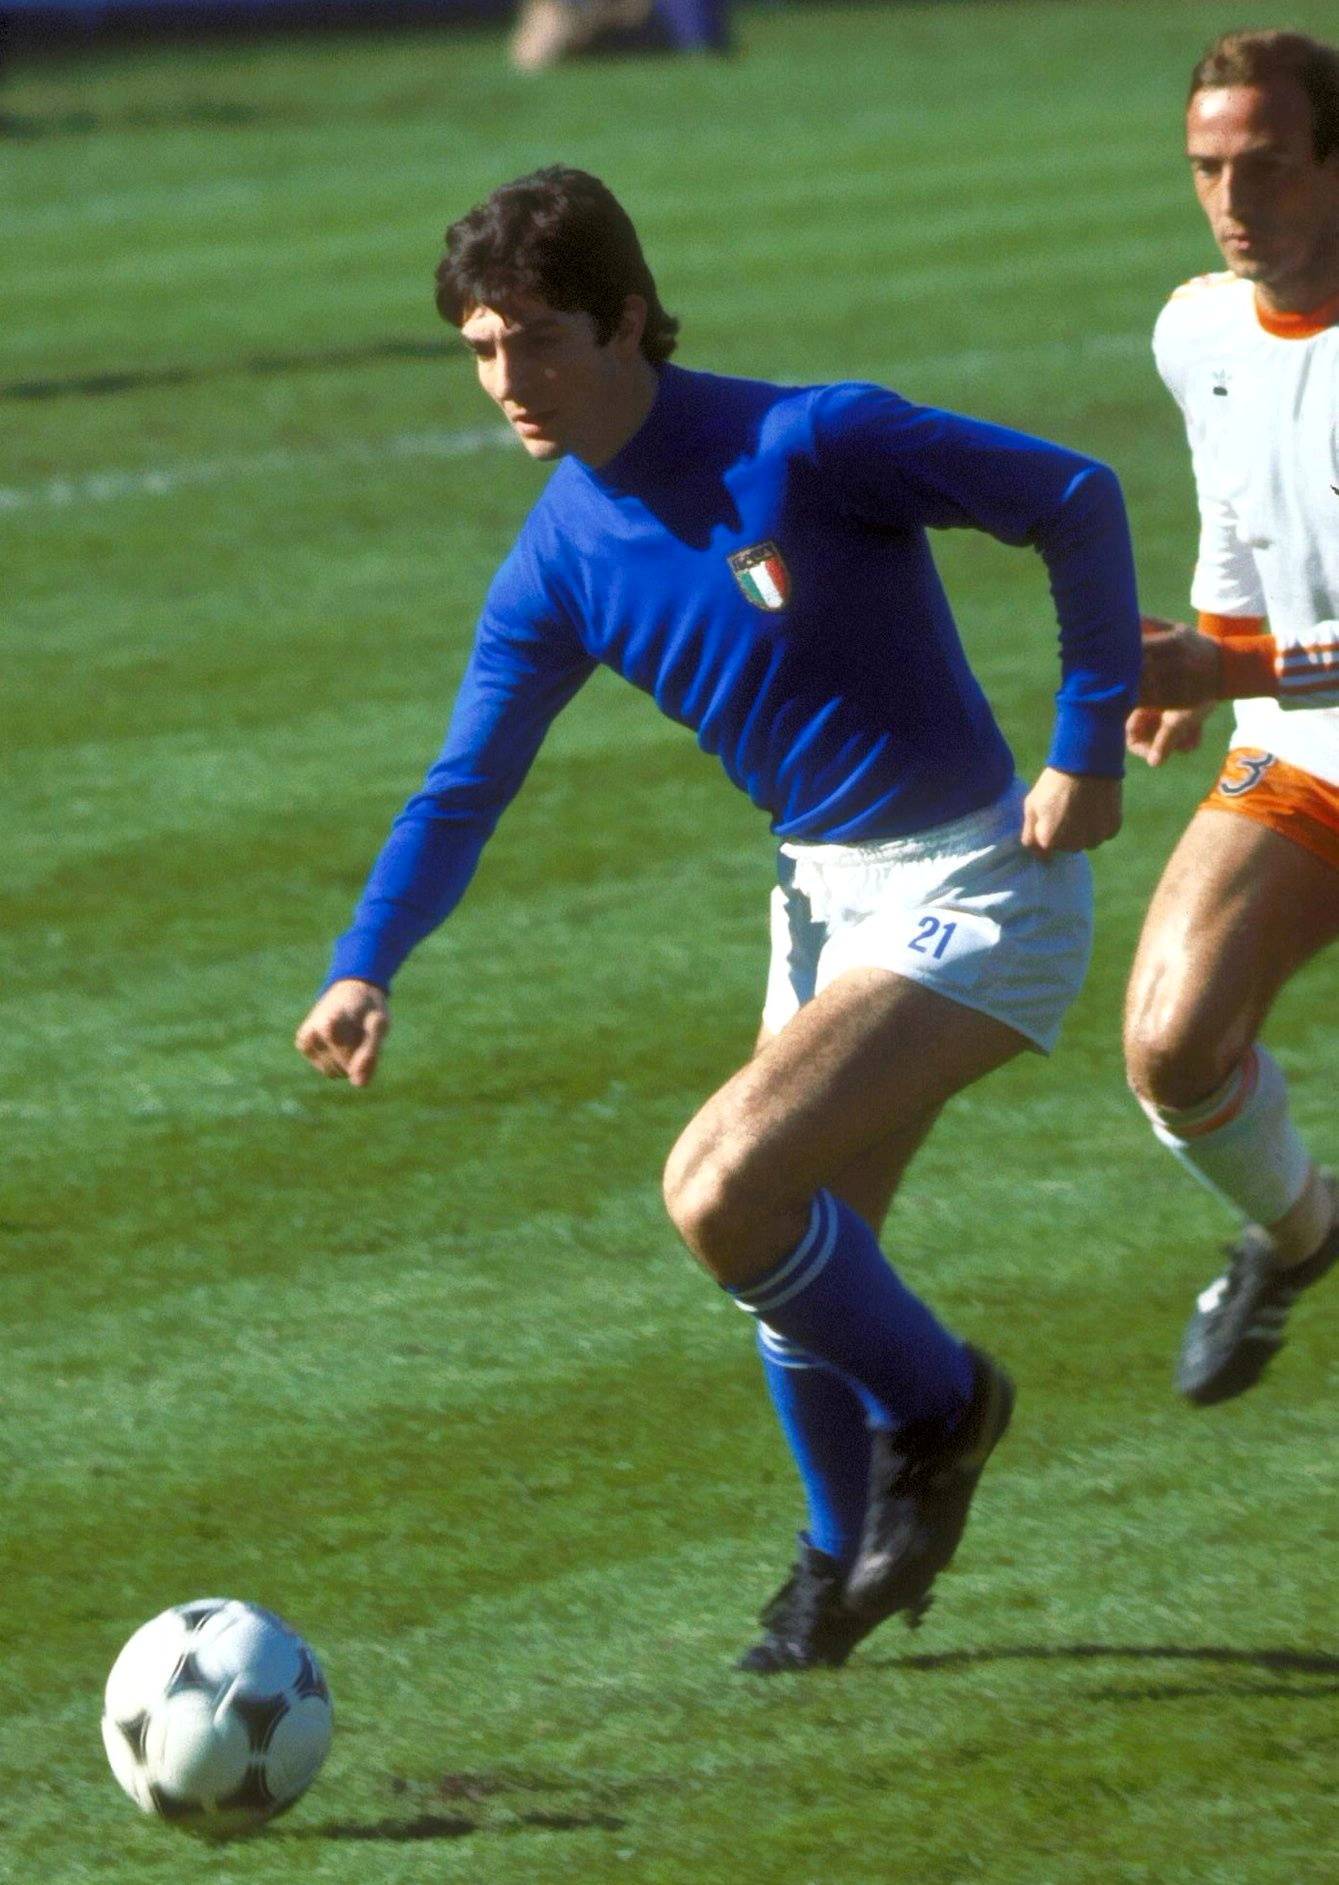 FILE PHOTO: An undated image of footballer Paolo Rossi of Italy